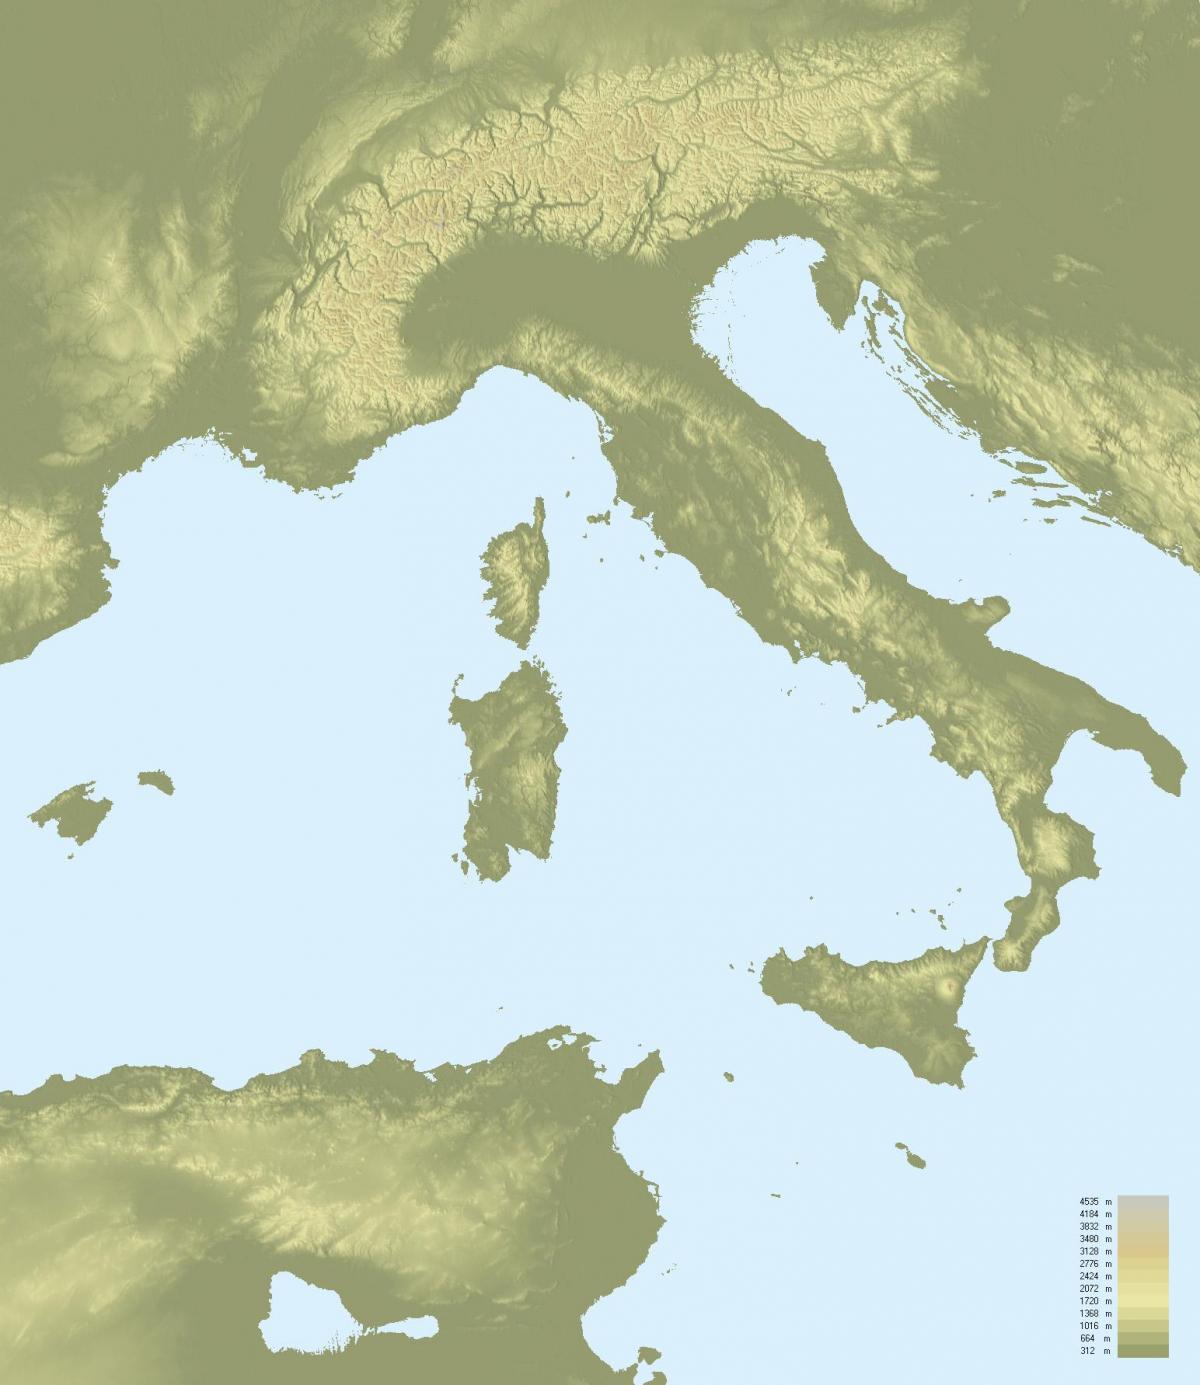 Topographical map of Italy